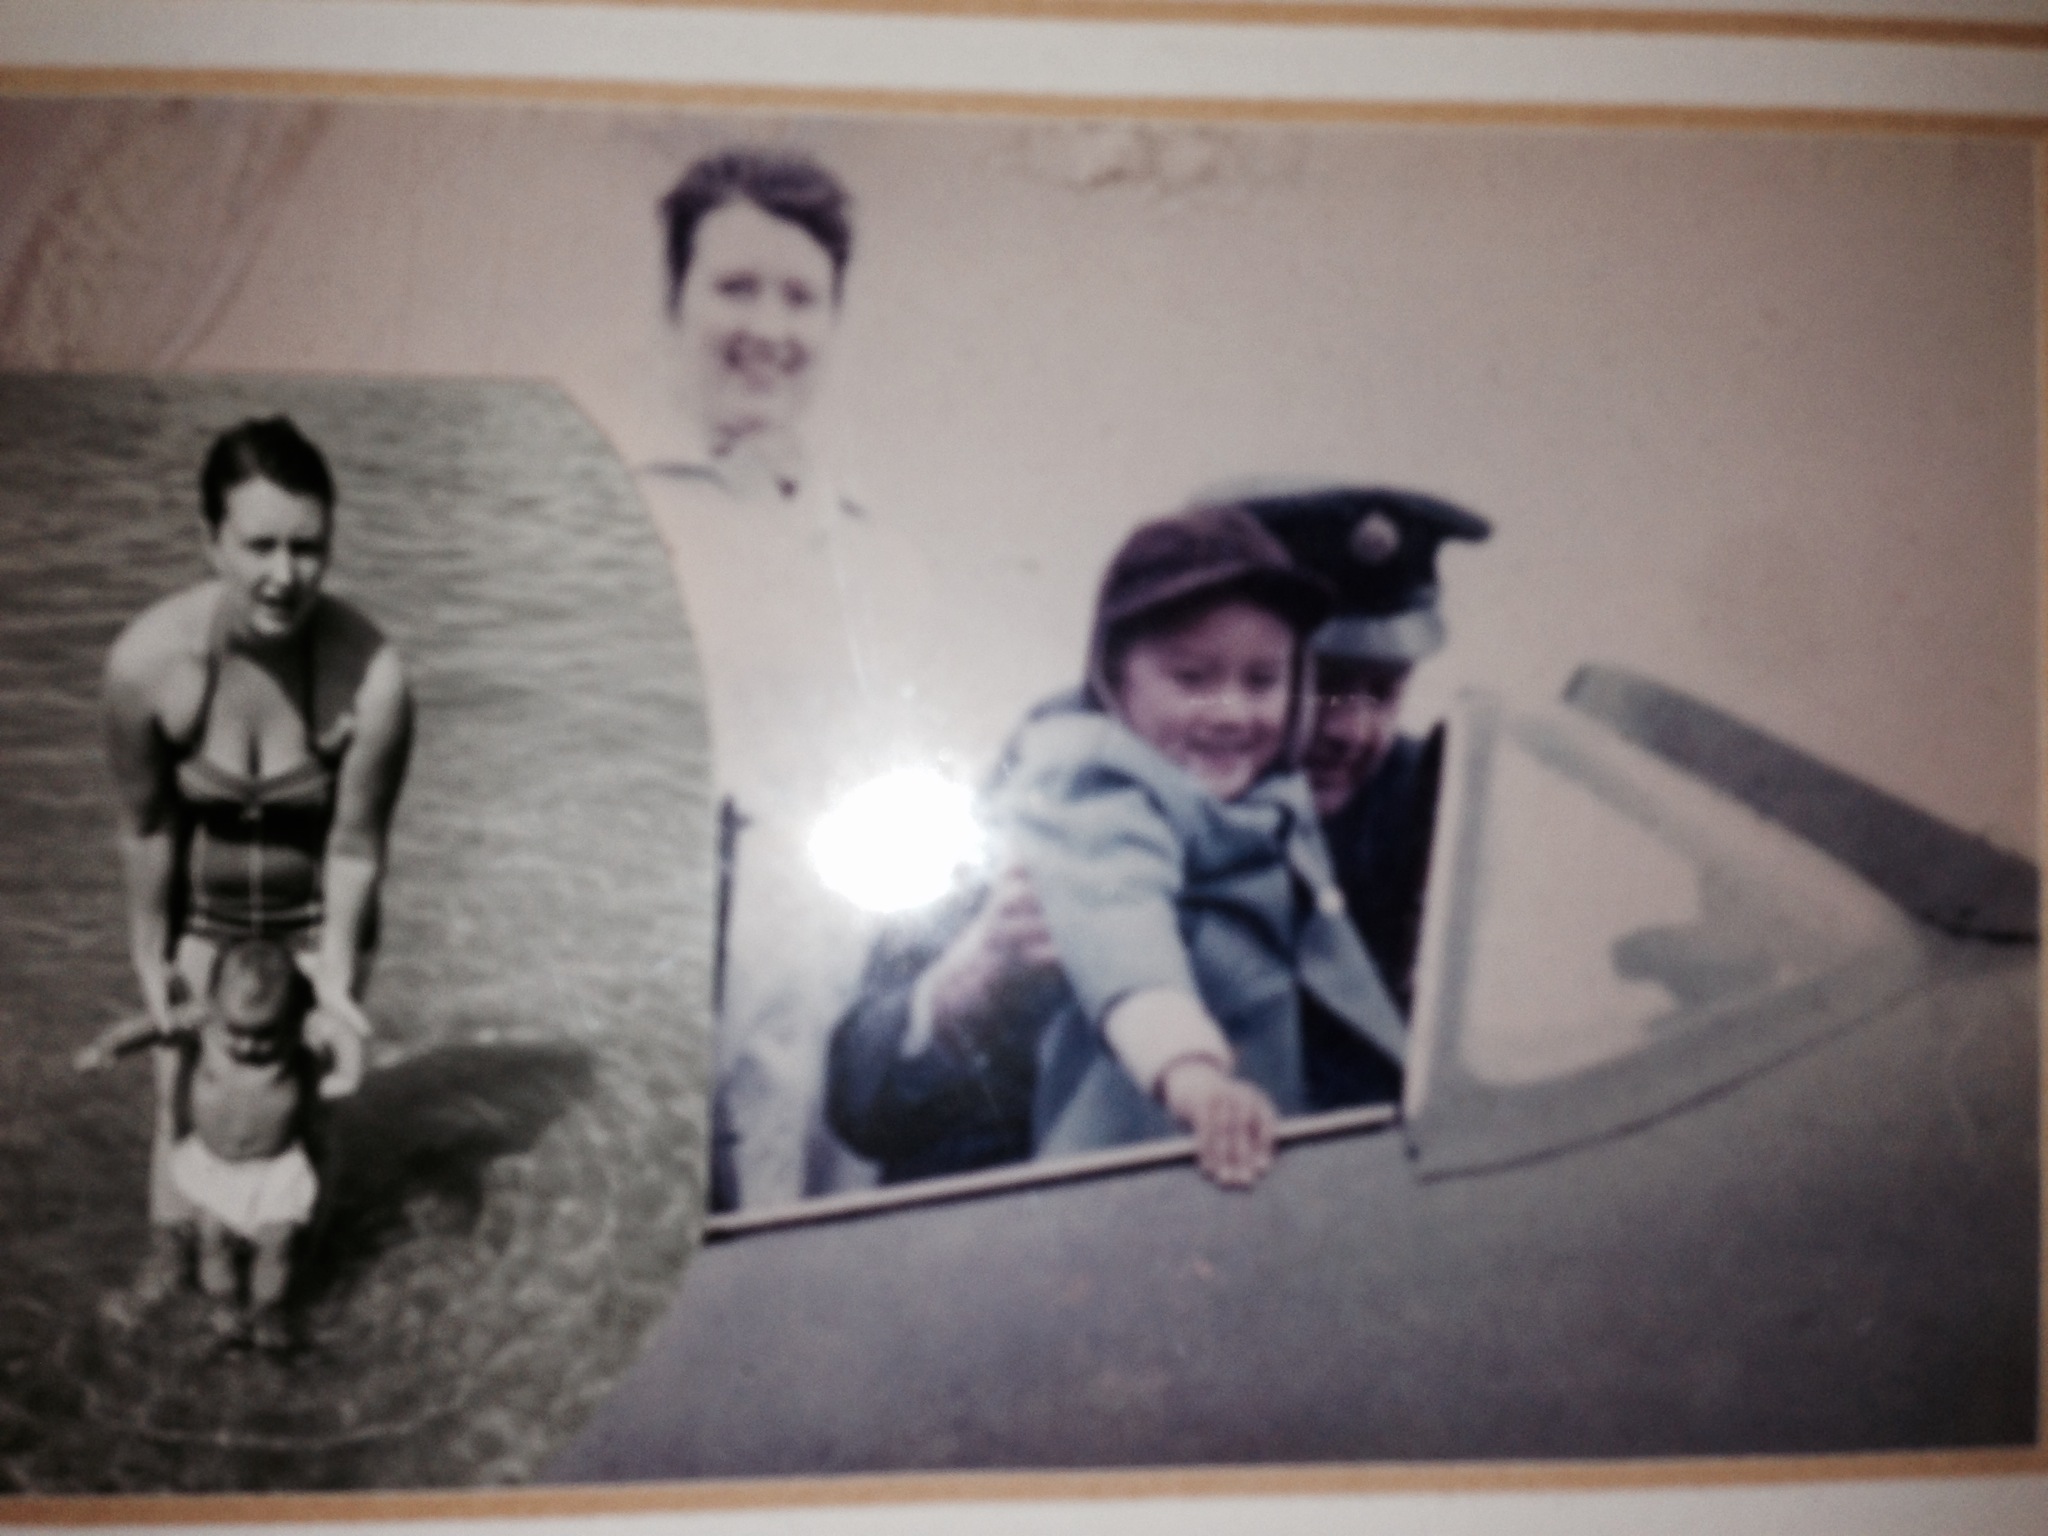 My first time in a plane (Spitfire) at the Royal Air Force Base in Abingdon, England. Here with my Mom. Also Mom and I in my birthplace Aden, Yemen.